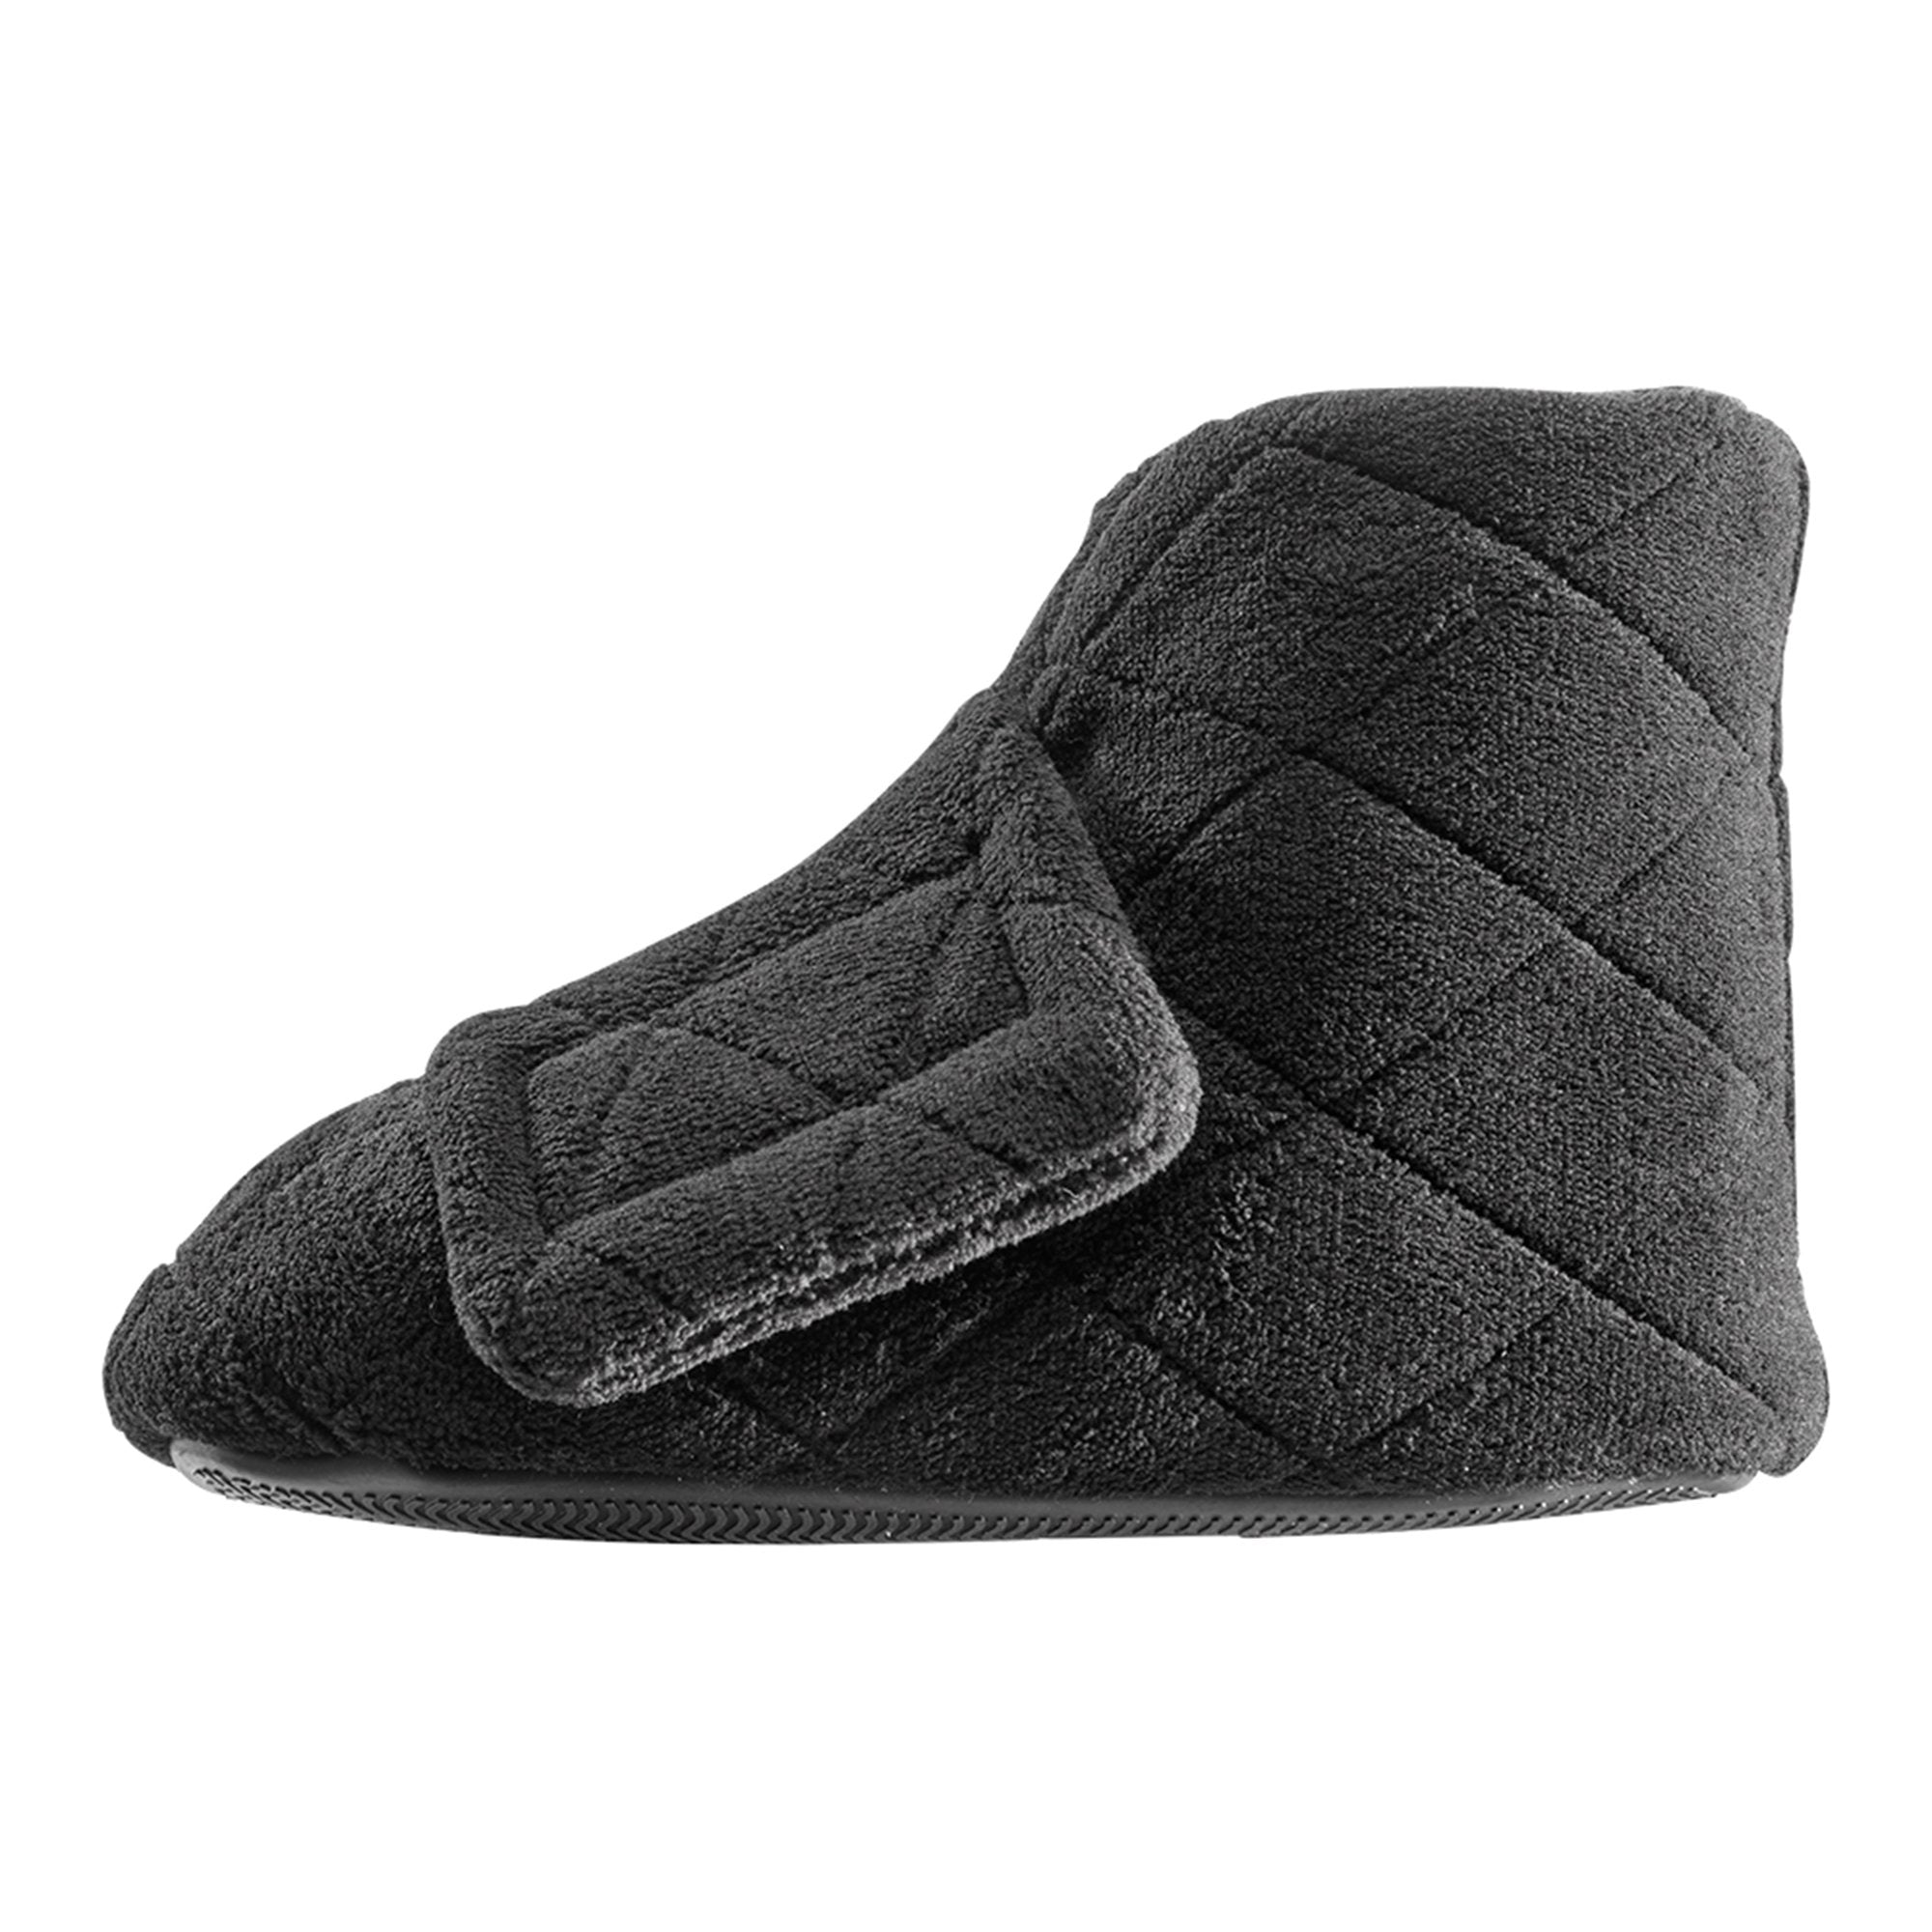 Bootie Slippers Silverts® Large / X-Wide Black Ankle High